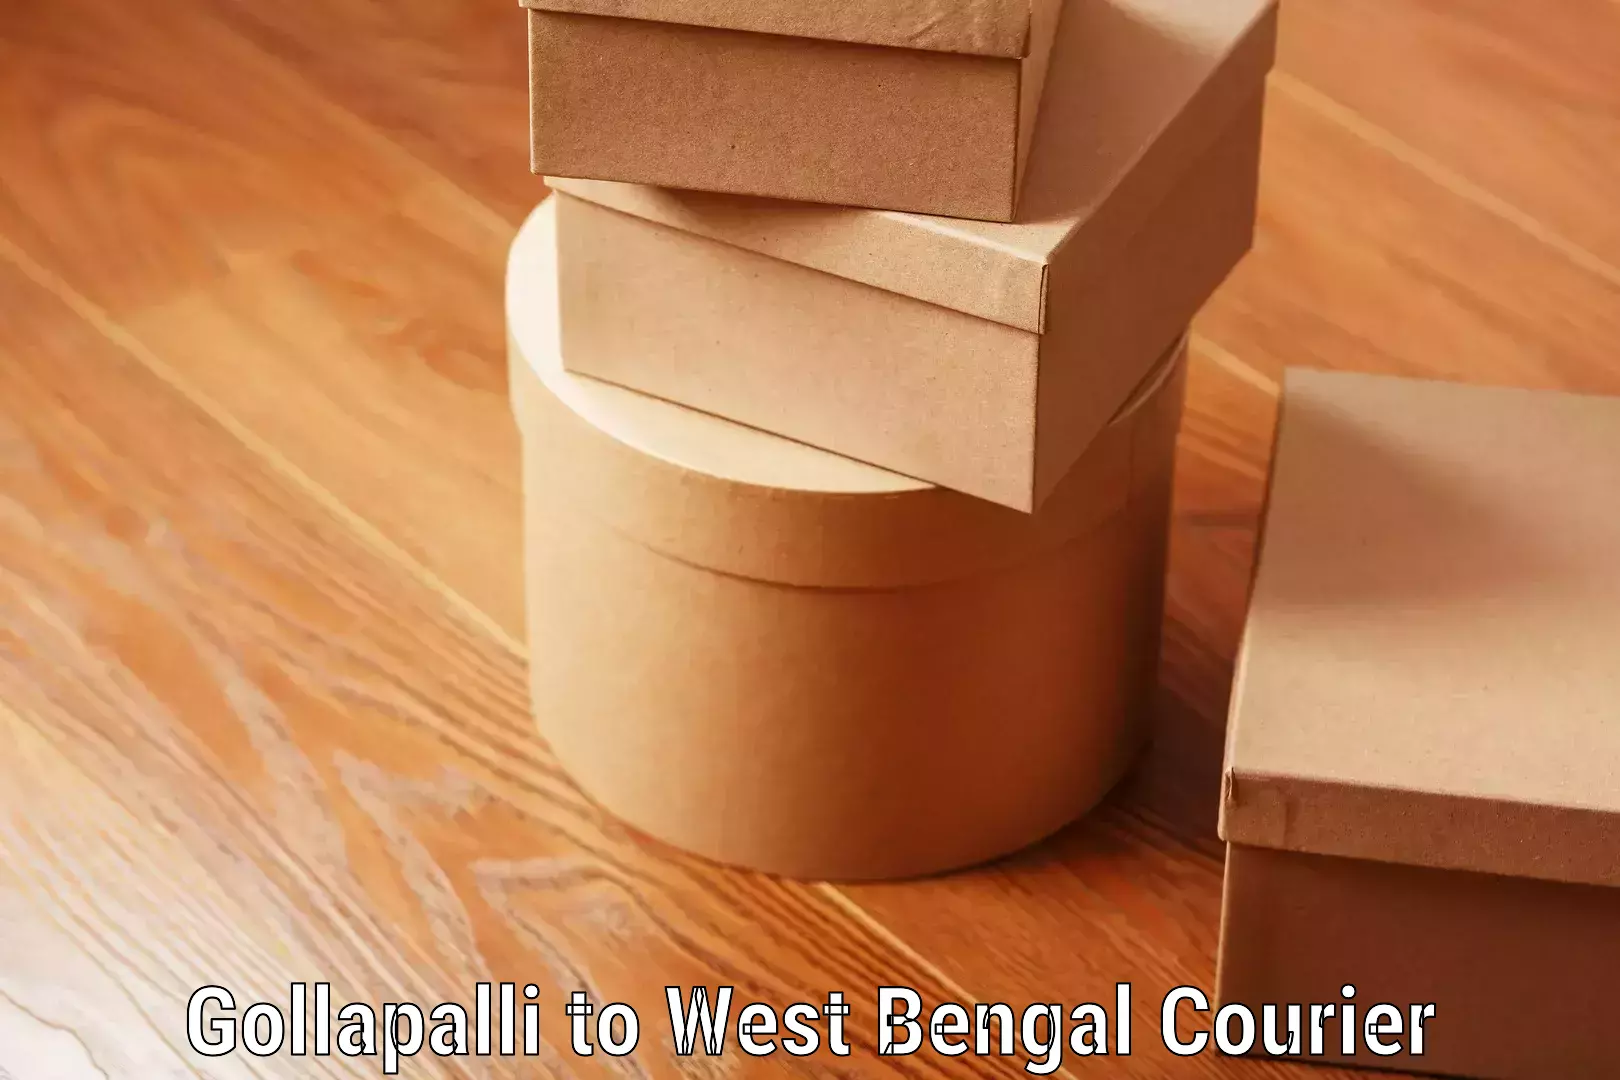 Baggage shipping experience Gollapalli to Alipore